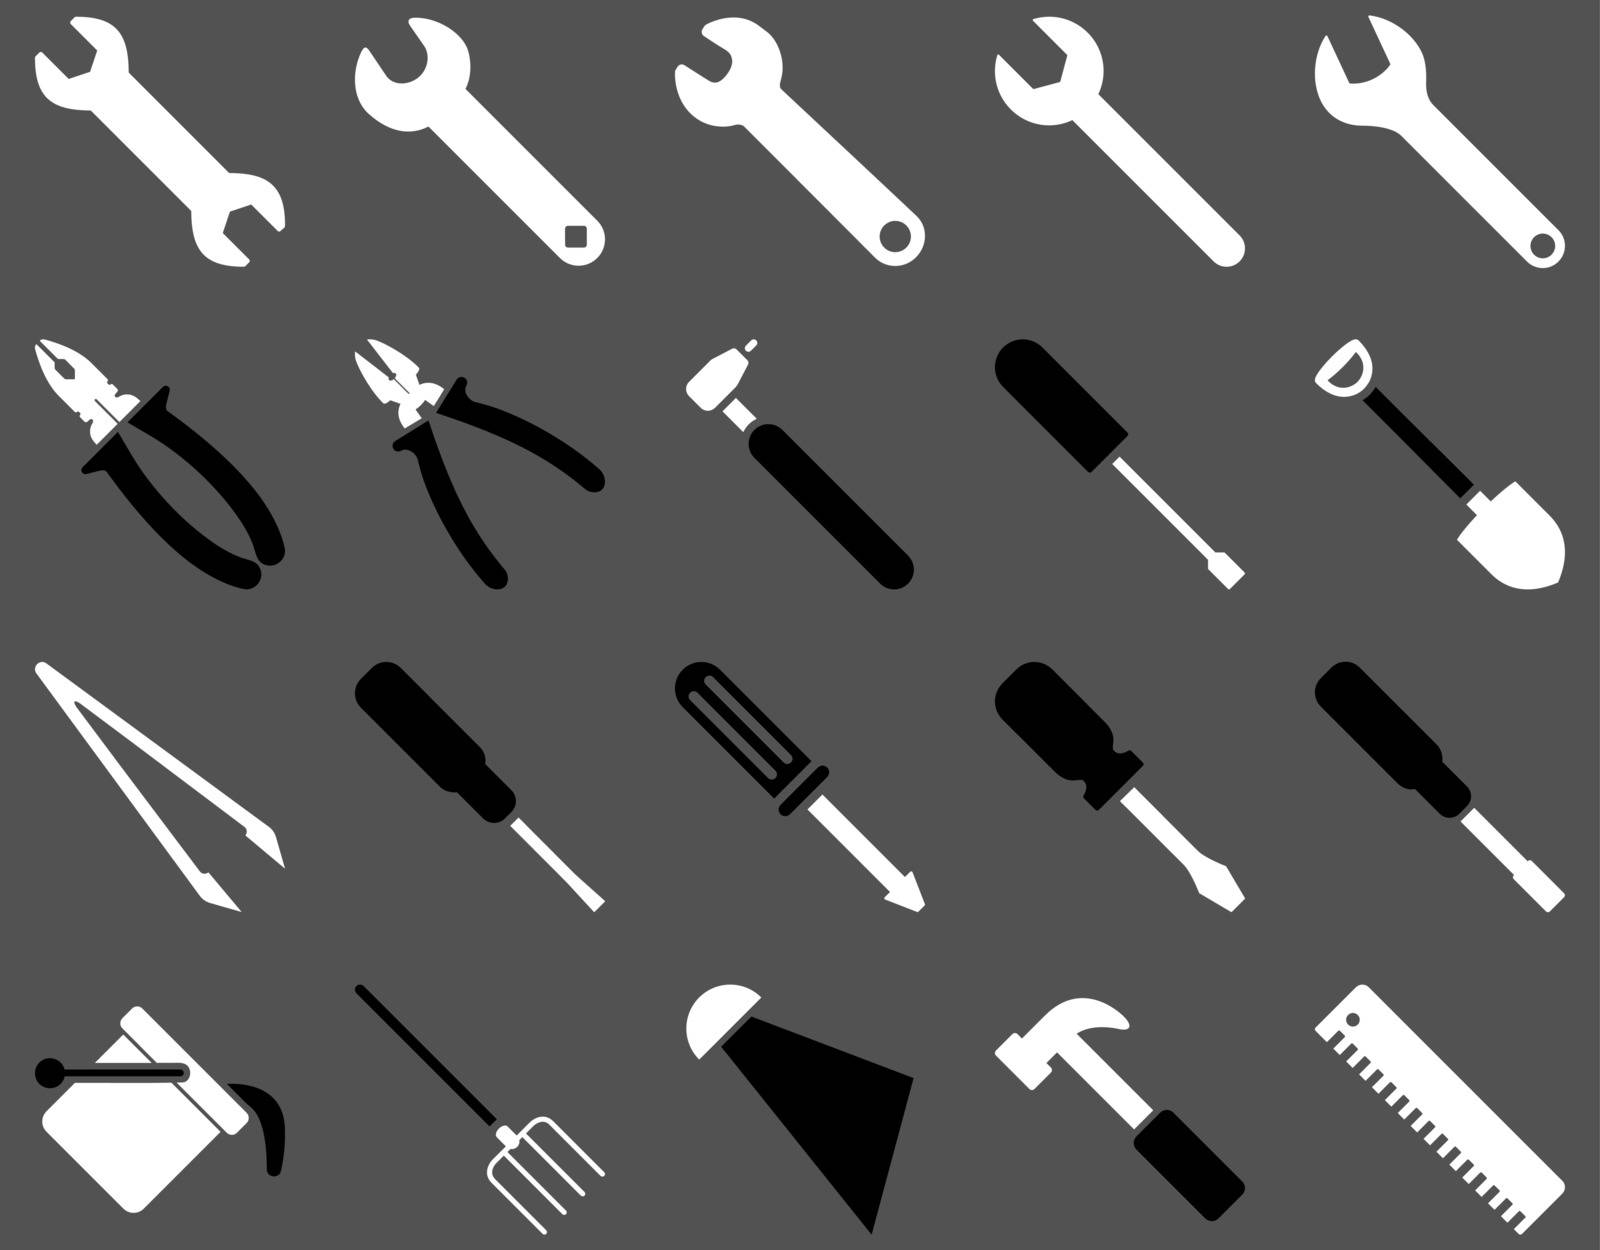 Equipment and Tools Icons. Vector set style is bicolor flat images, black and white colors, isolated on a gray background.